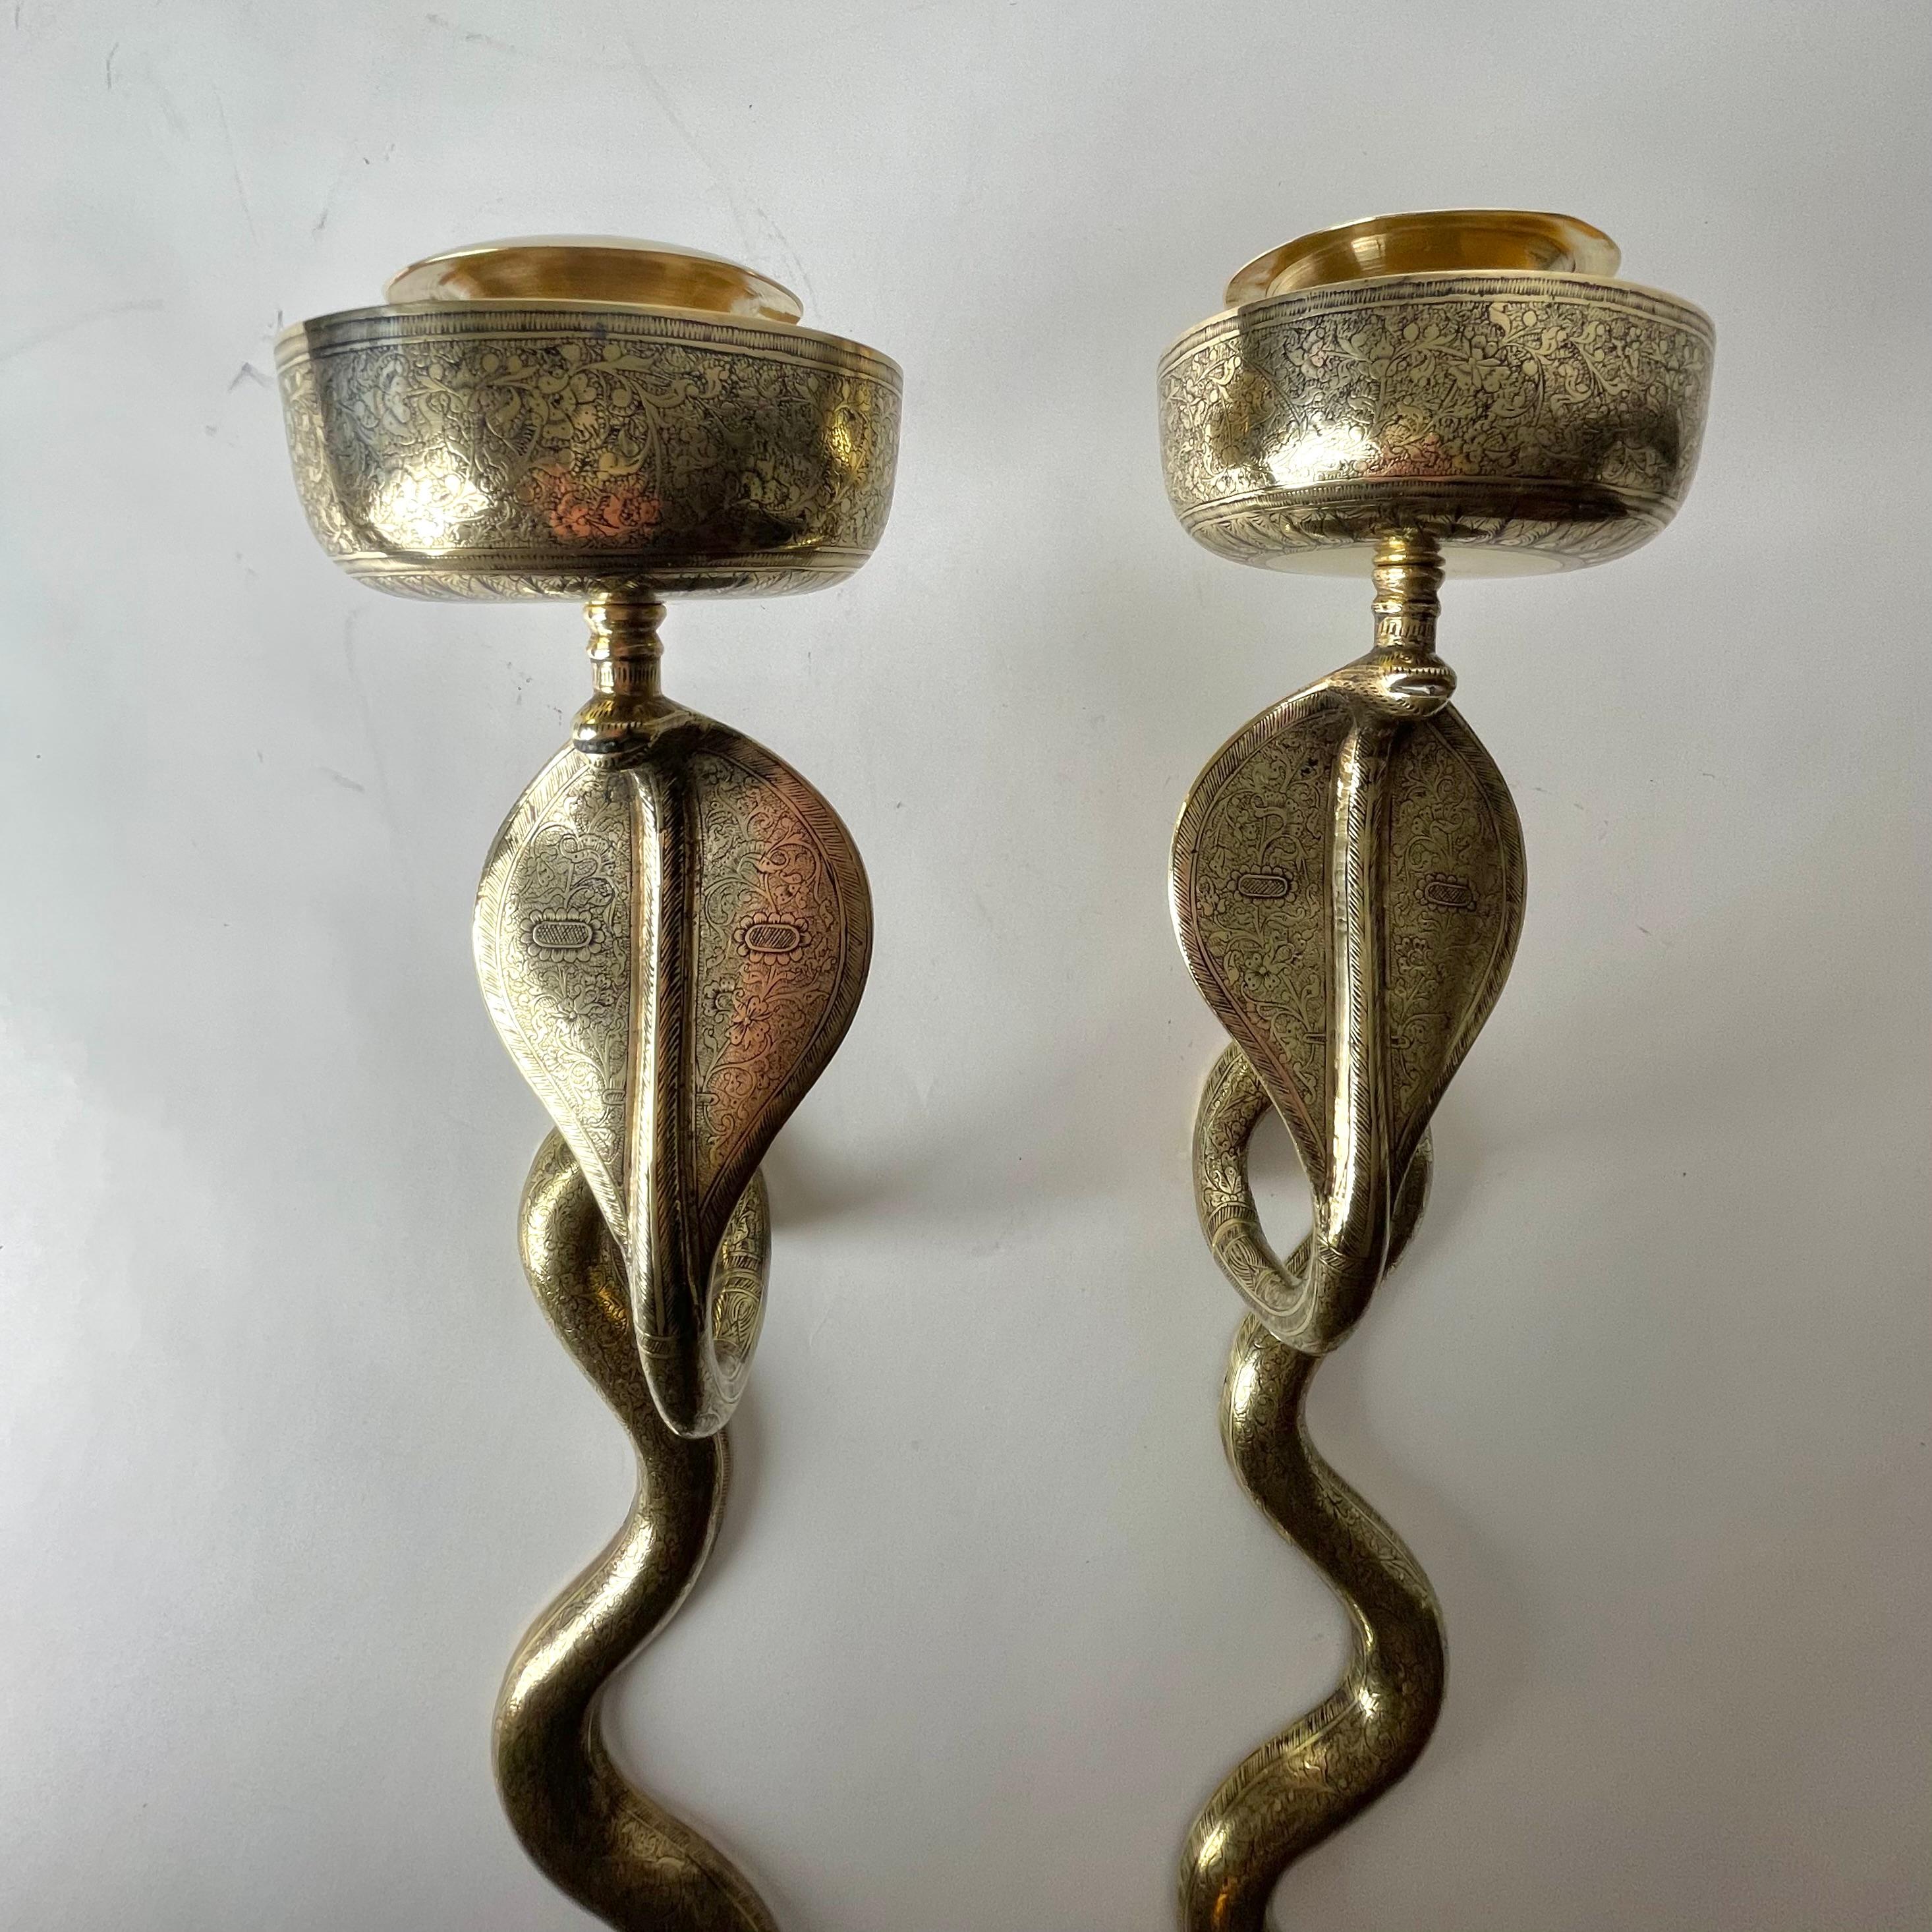 Brass Pair of Wall Lights  in the Shape of a Cobra, Art Deco, 1920s-1930s For Sale